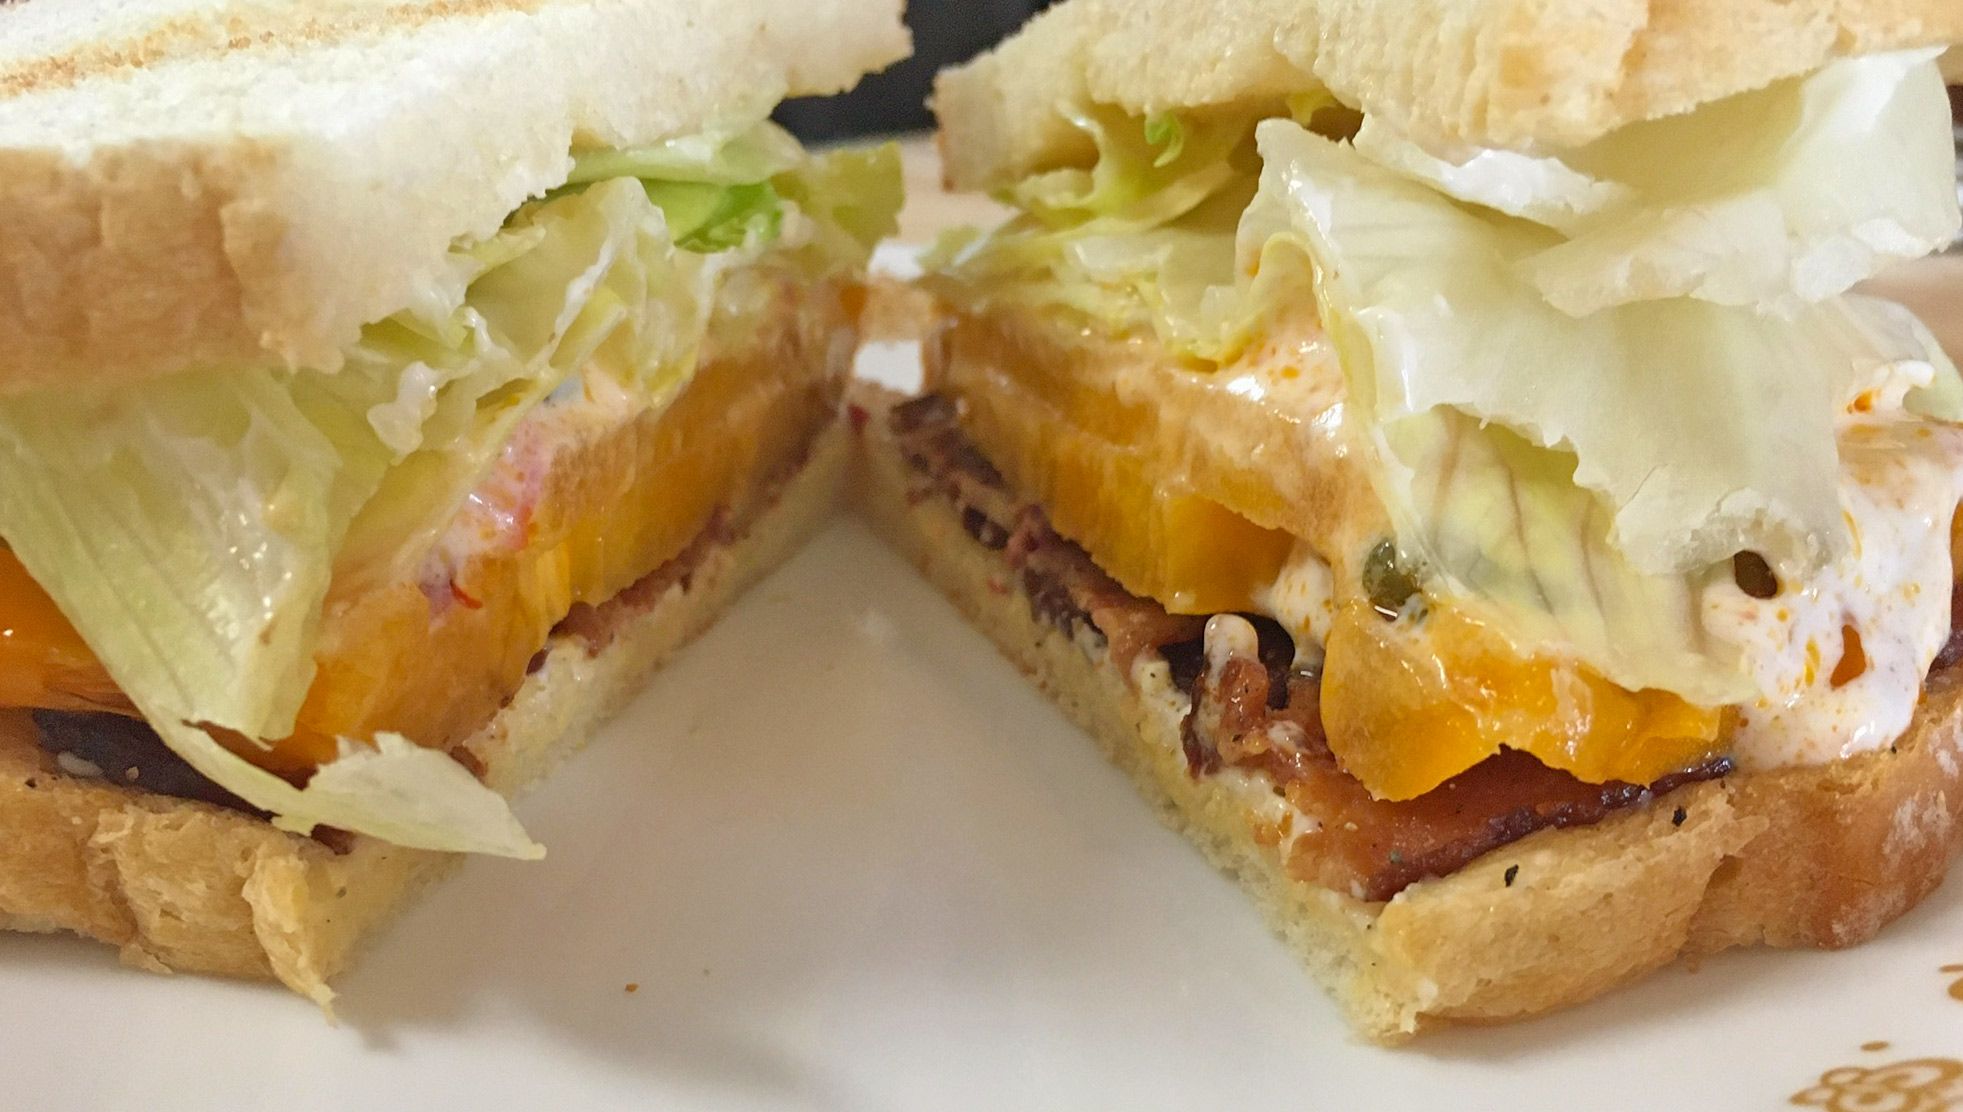 A sandwich is on a plate, with bacon, yellow tomato, and lettuce.